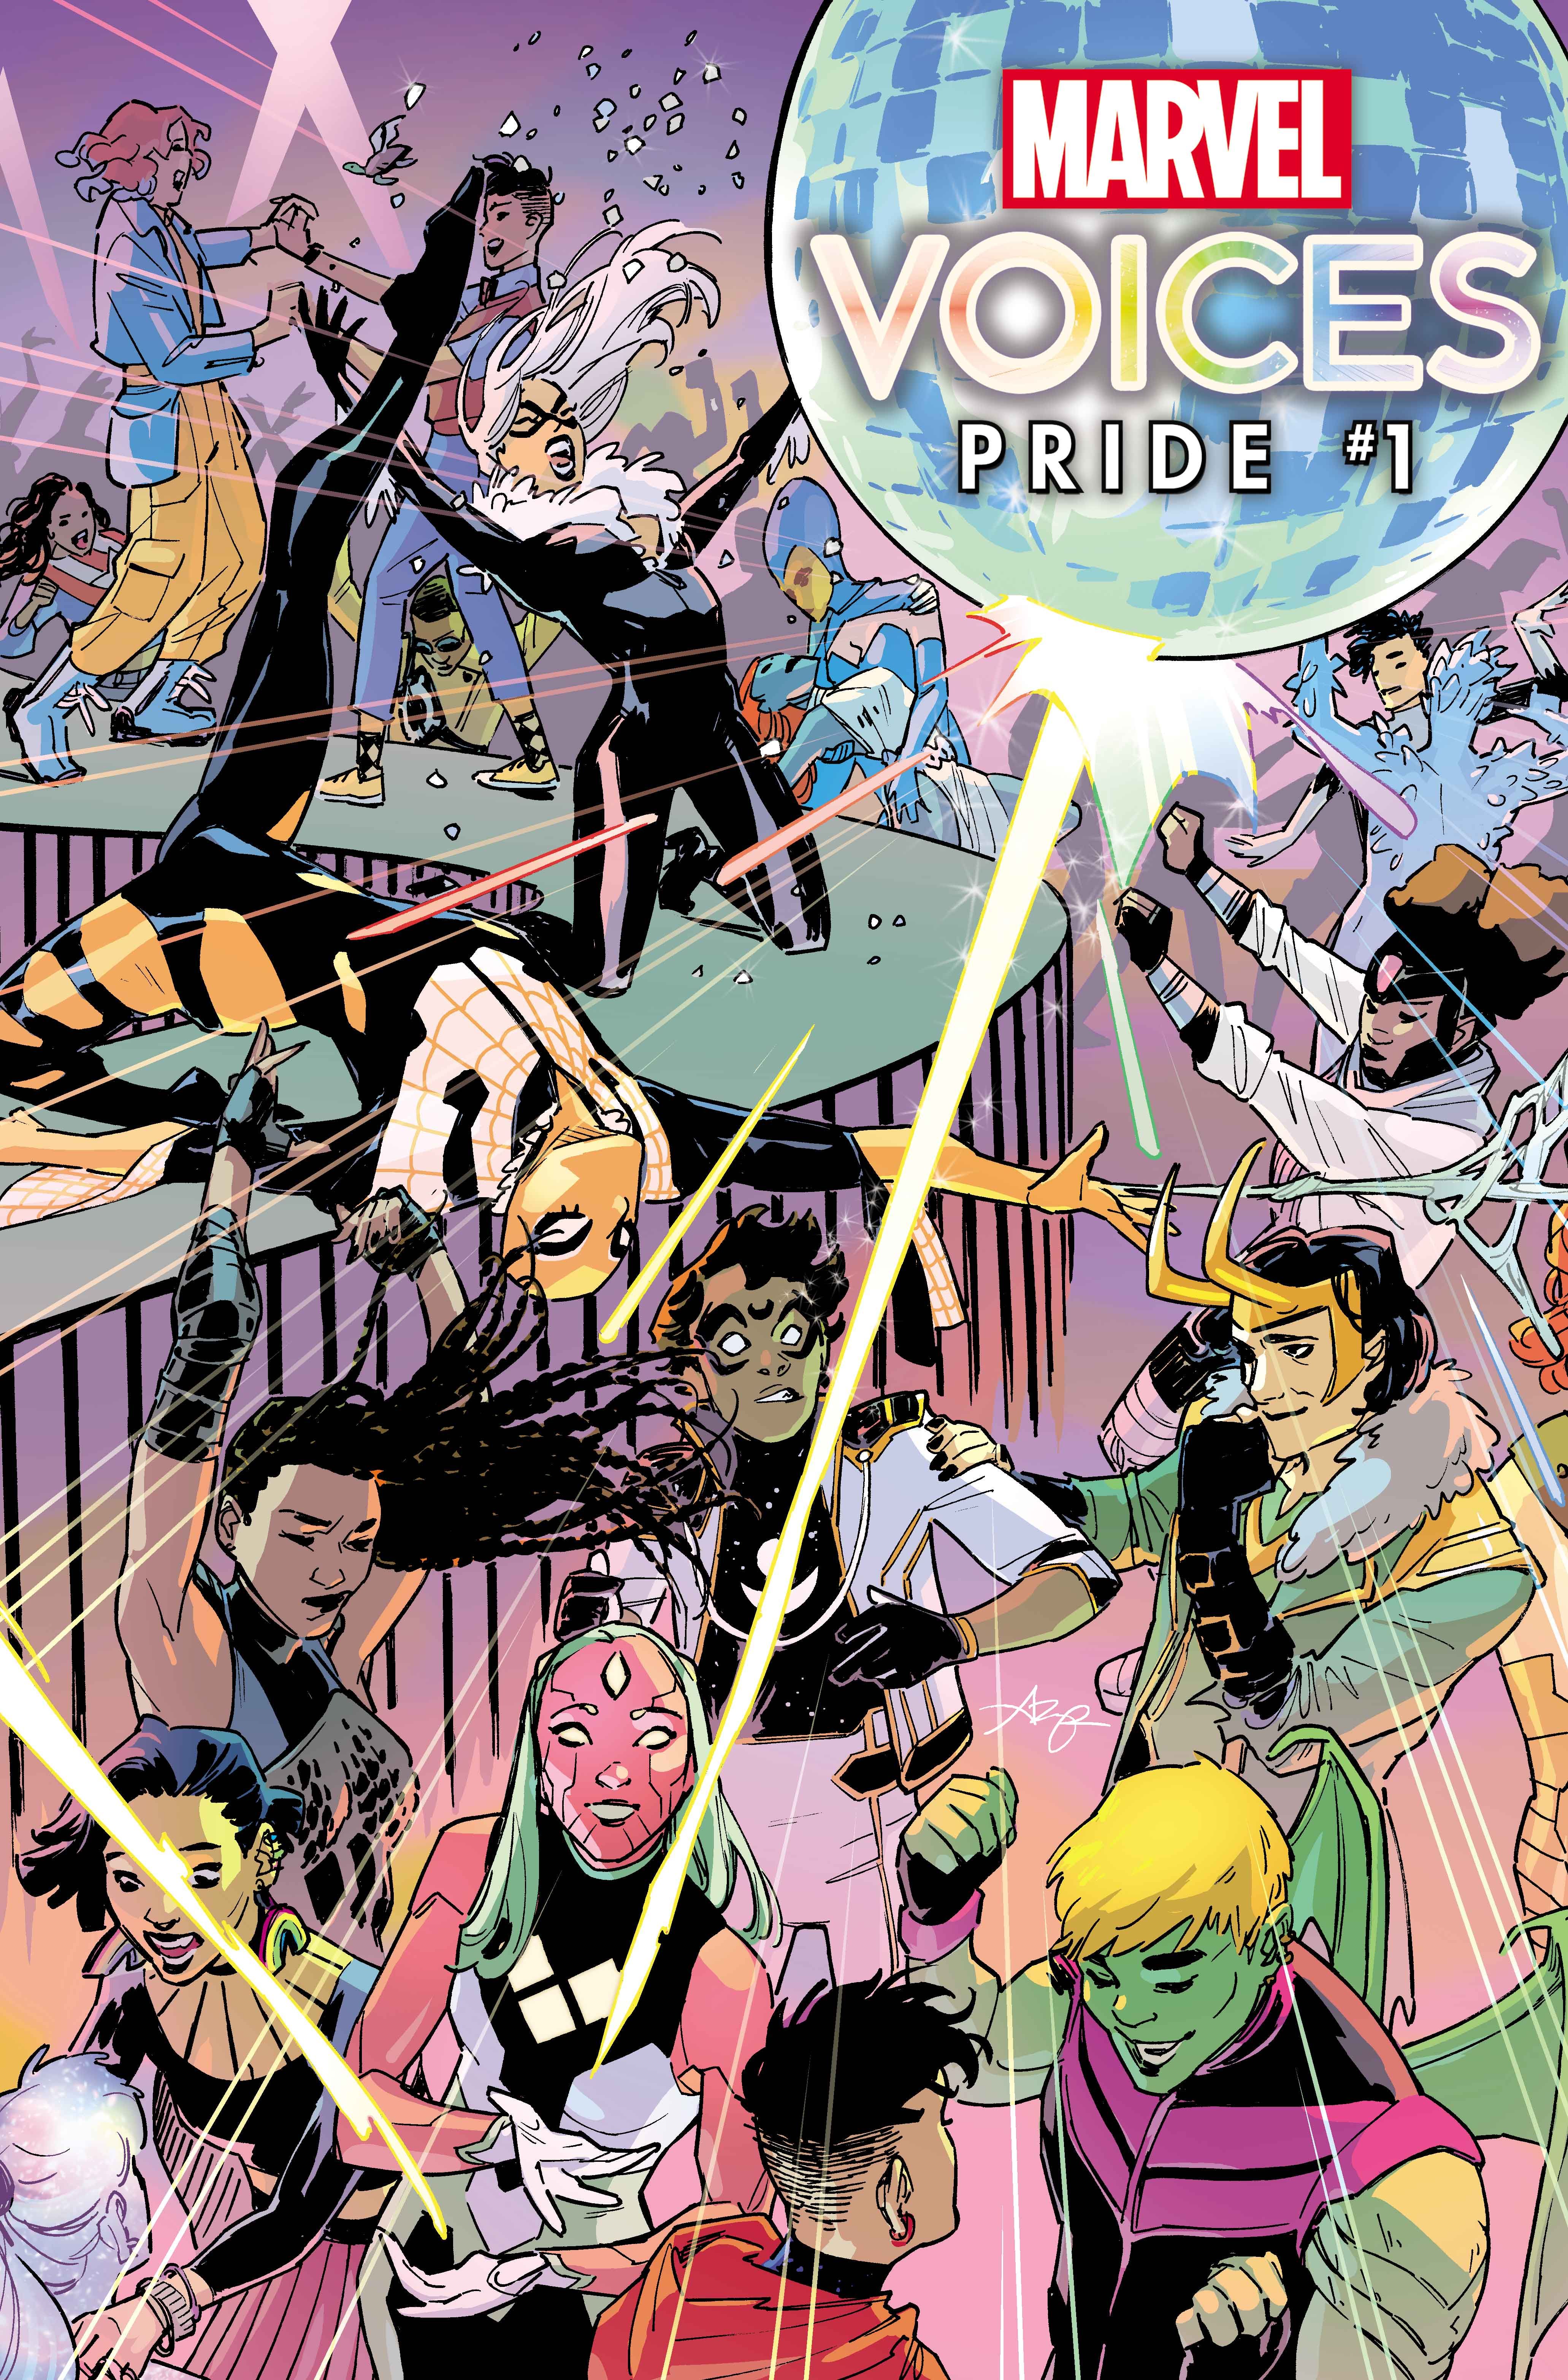 Marvel Voices: Pride cover art featuring iconic Marvel heroes at a party.